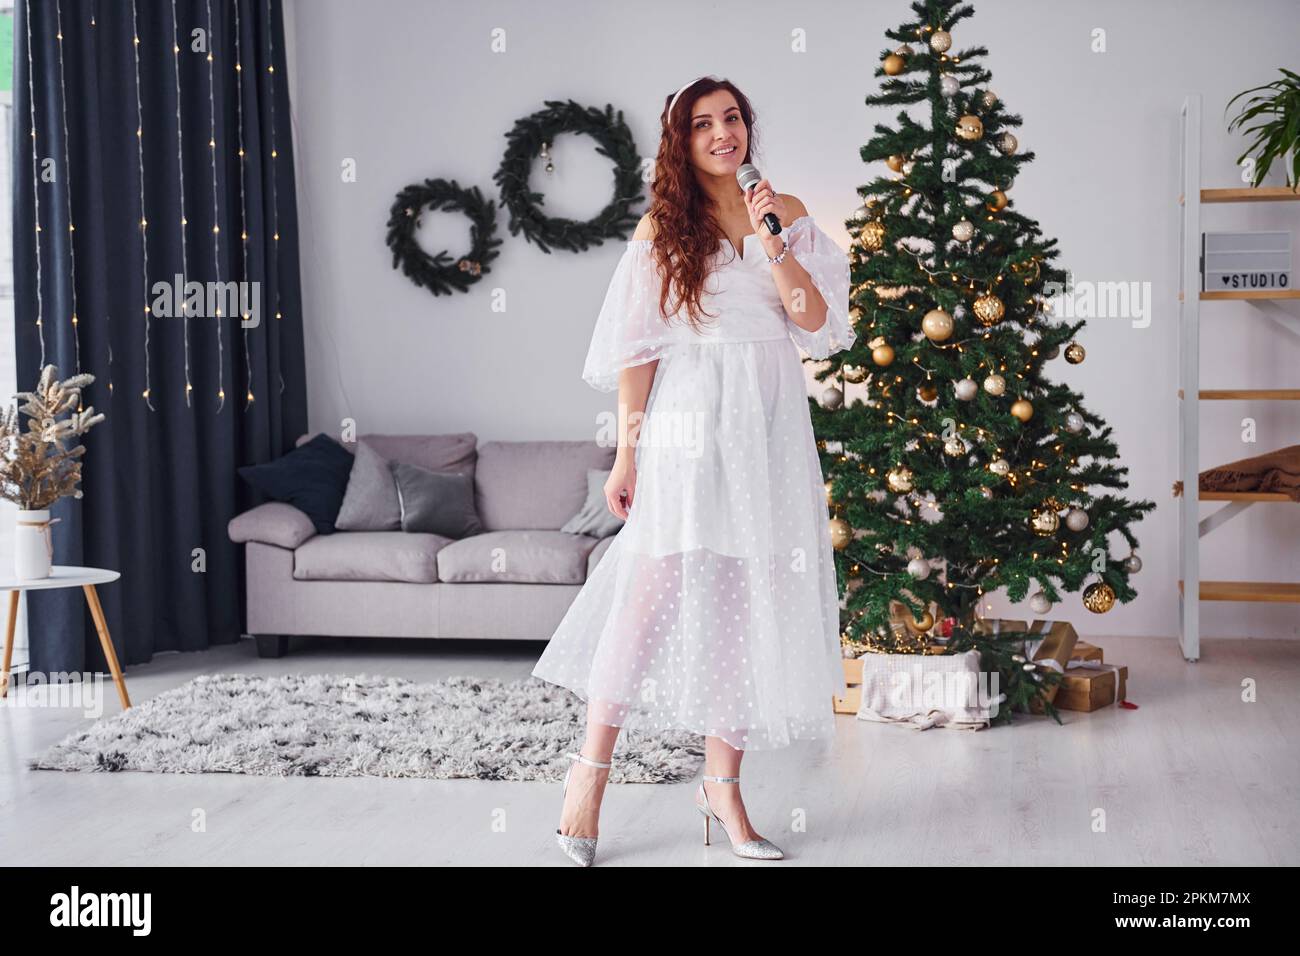 Woman in white dress and with microphone in hands is singing in the christmas decorated domestic room. Stock Photo